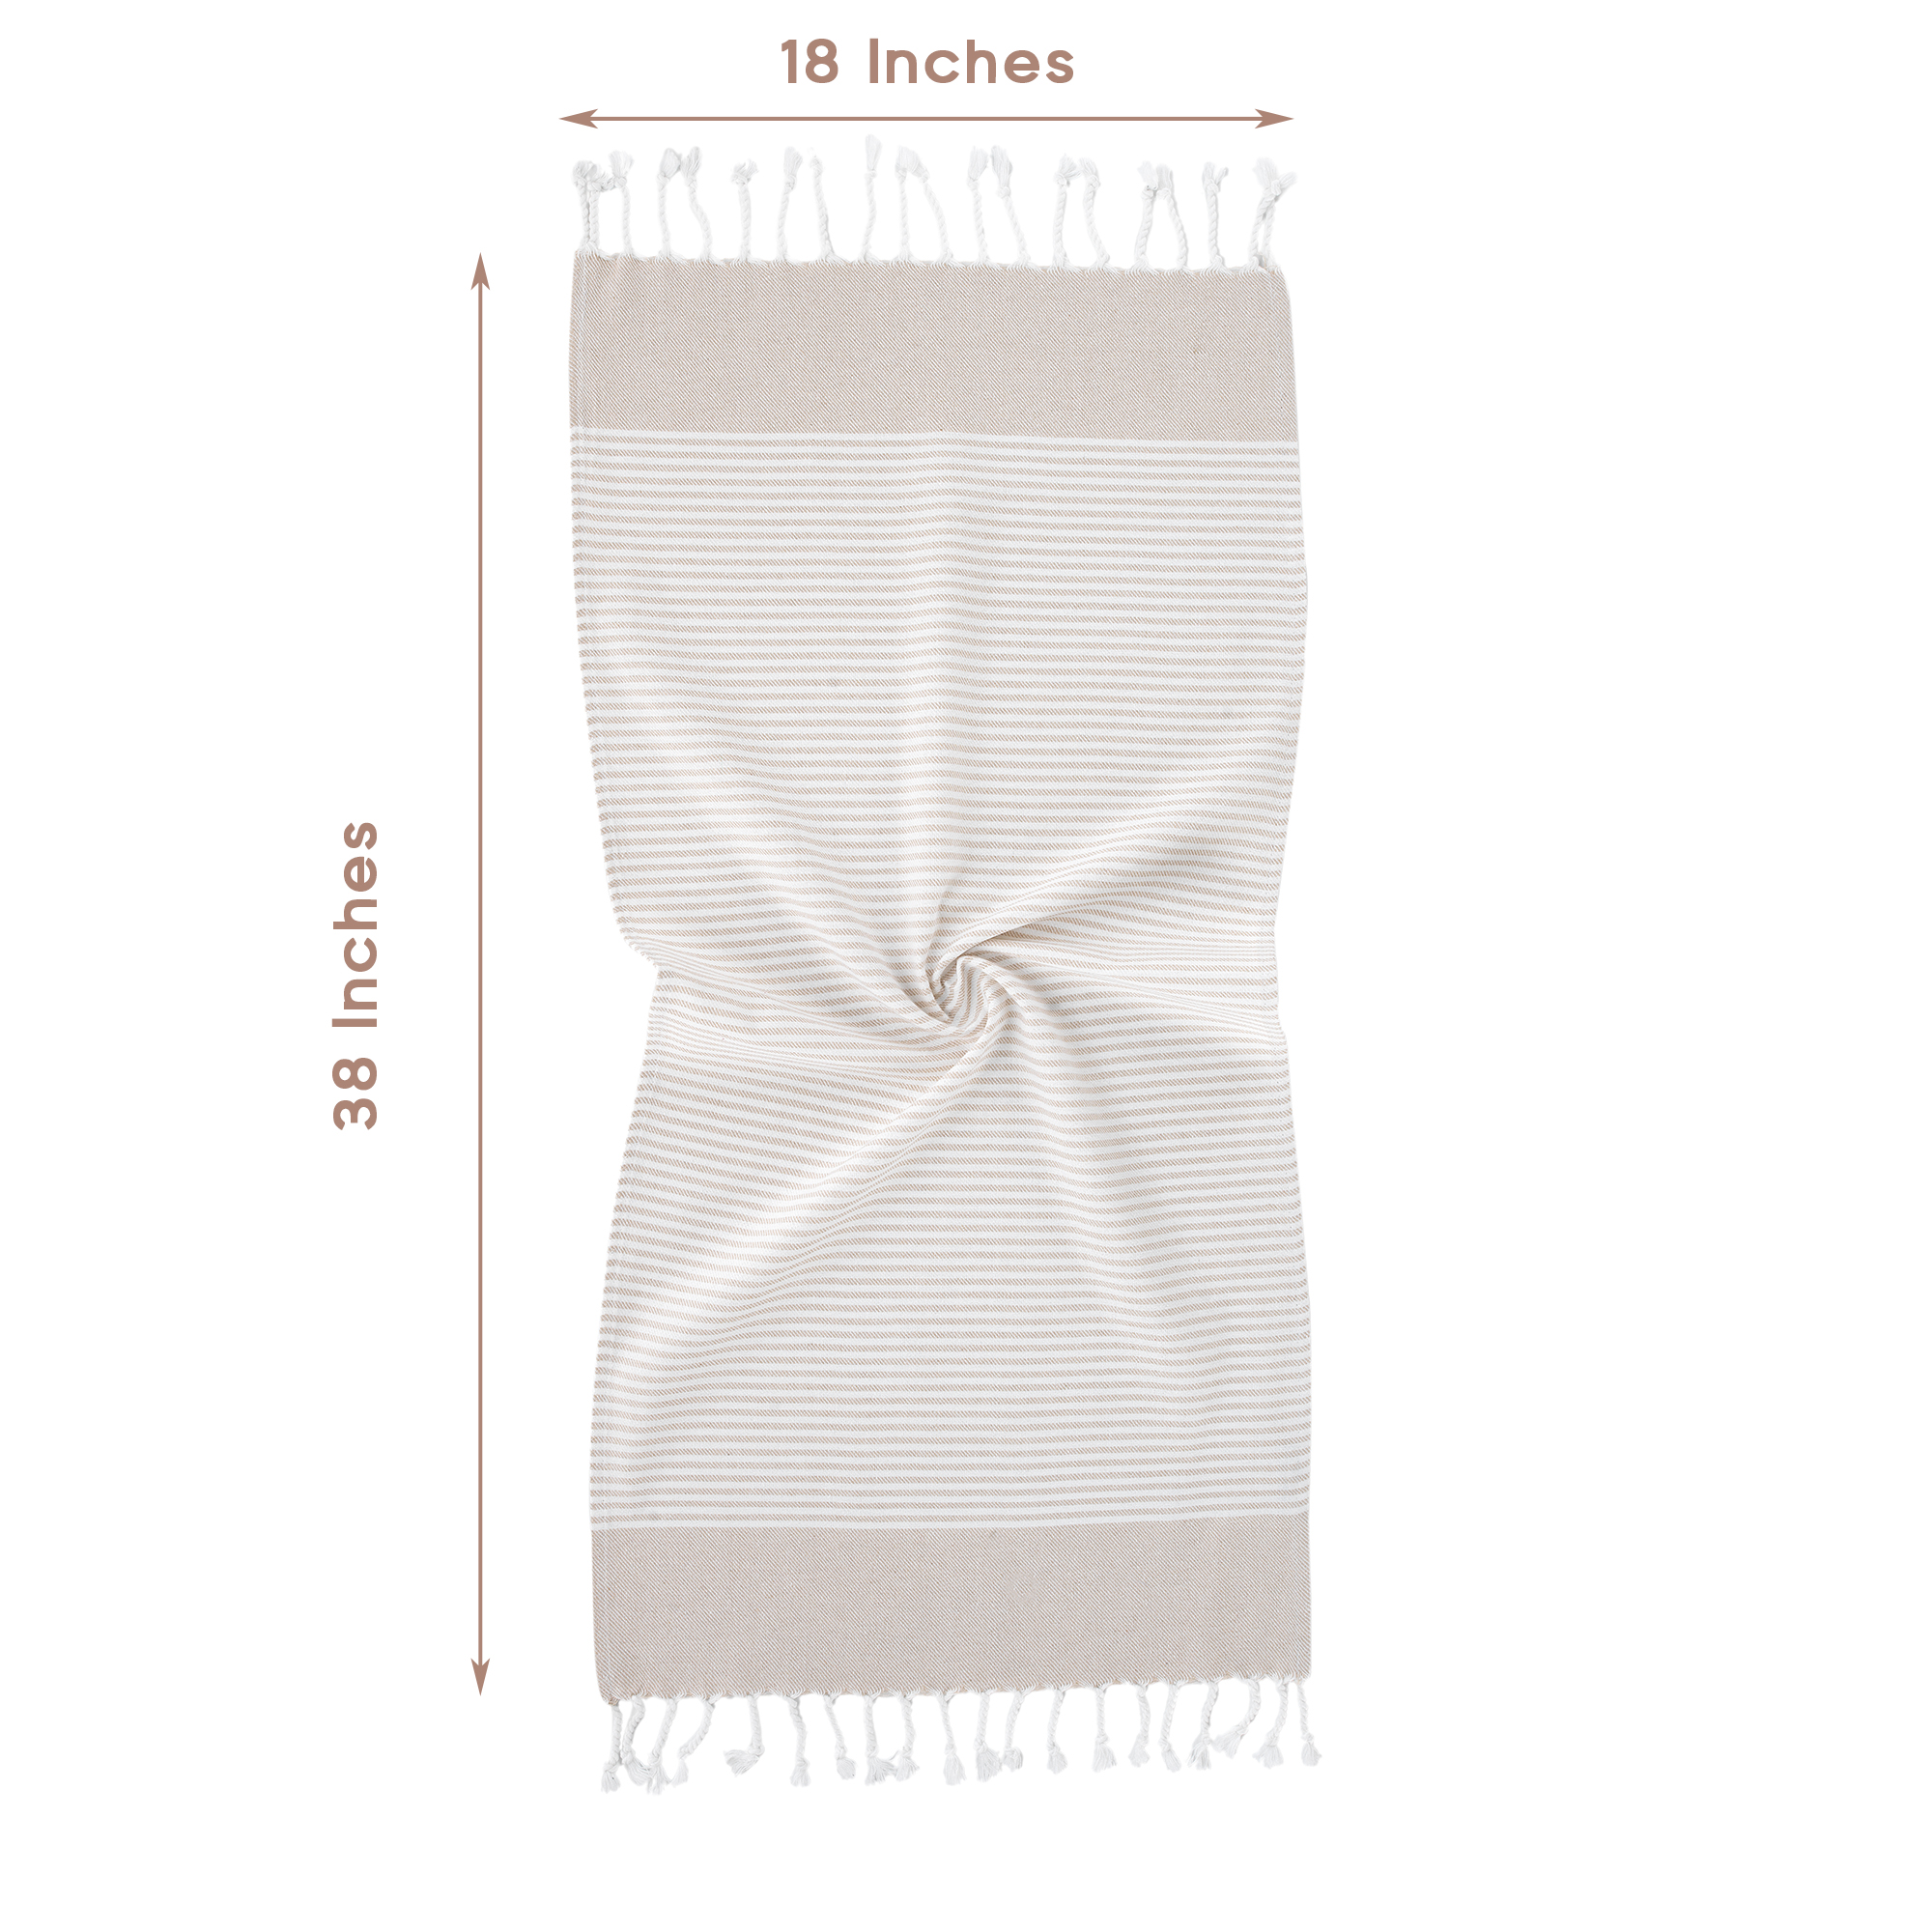 Turkish Hand Towels for Bathroom and Kitchen, 18 x 38 Inches, (Set of 3), Beige - image 5 of 6